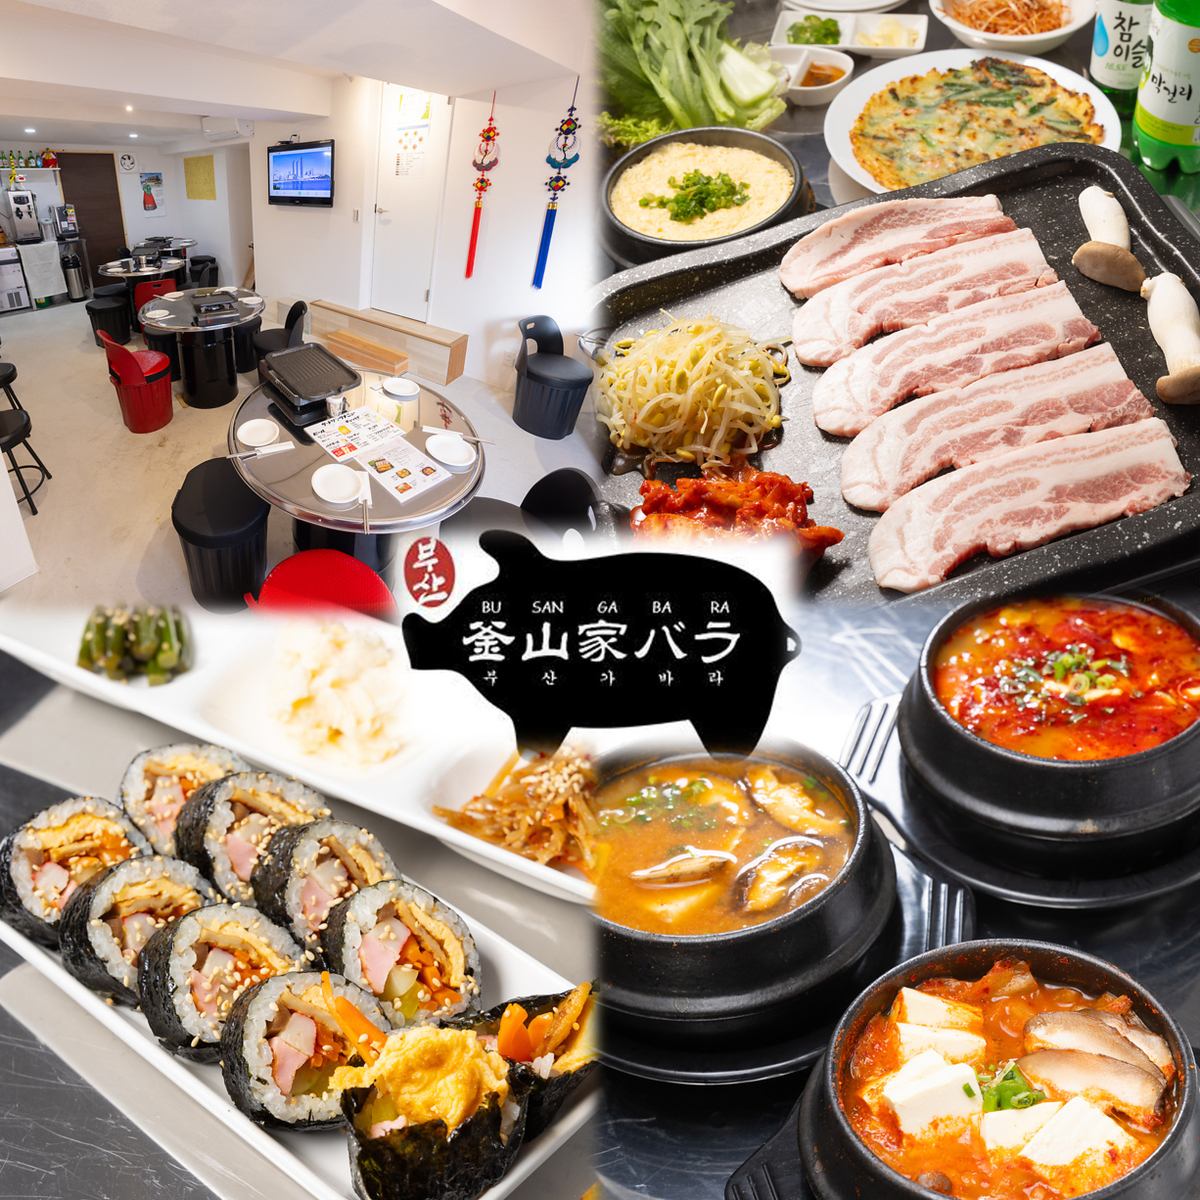 Samgyeopsal is recommended! Authentic Korean food prepared by a Korean chef♪ Courses are also available!